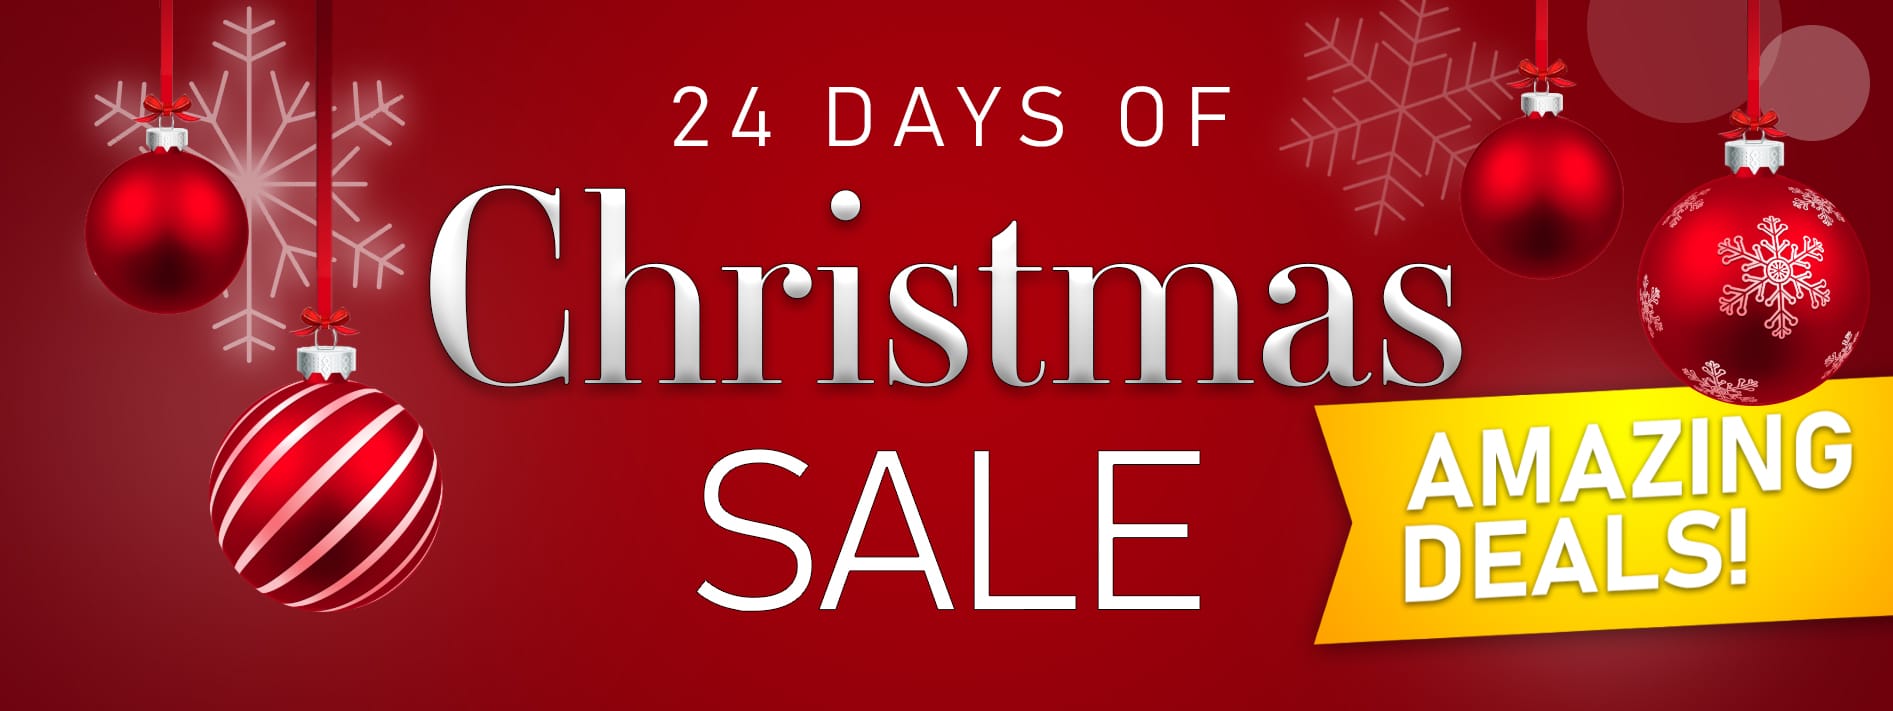 24 Days Of Christmas Sale Web Banner Landing Page